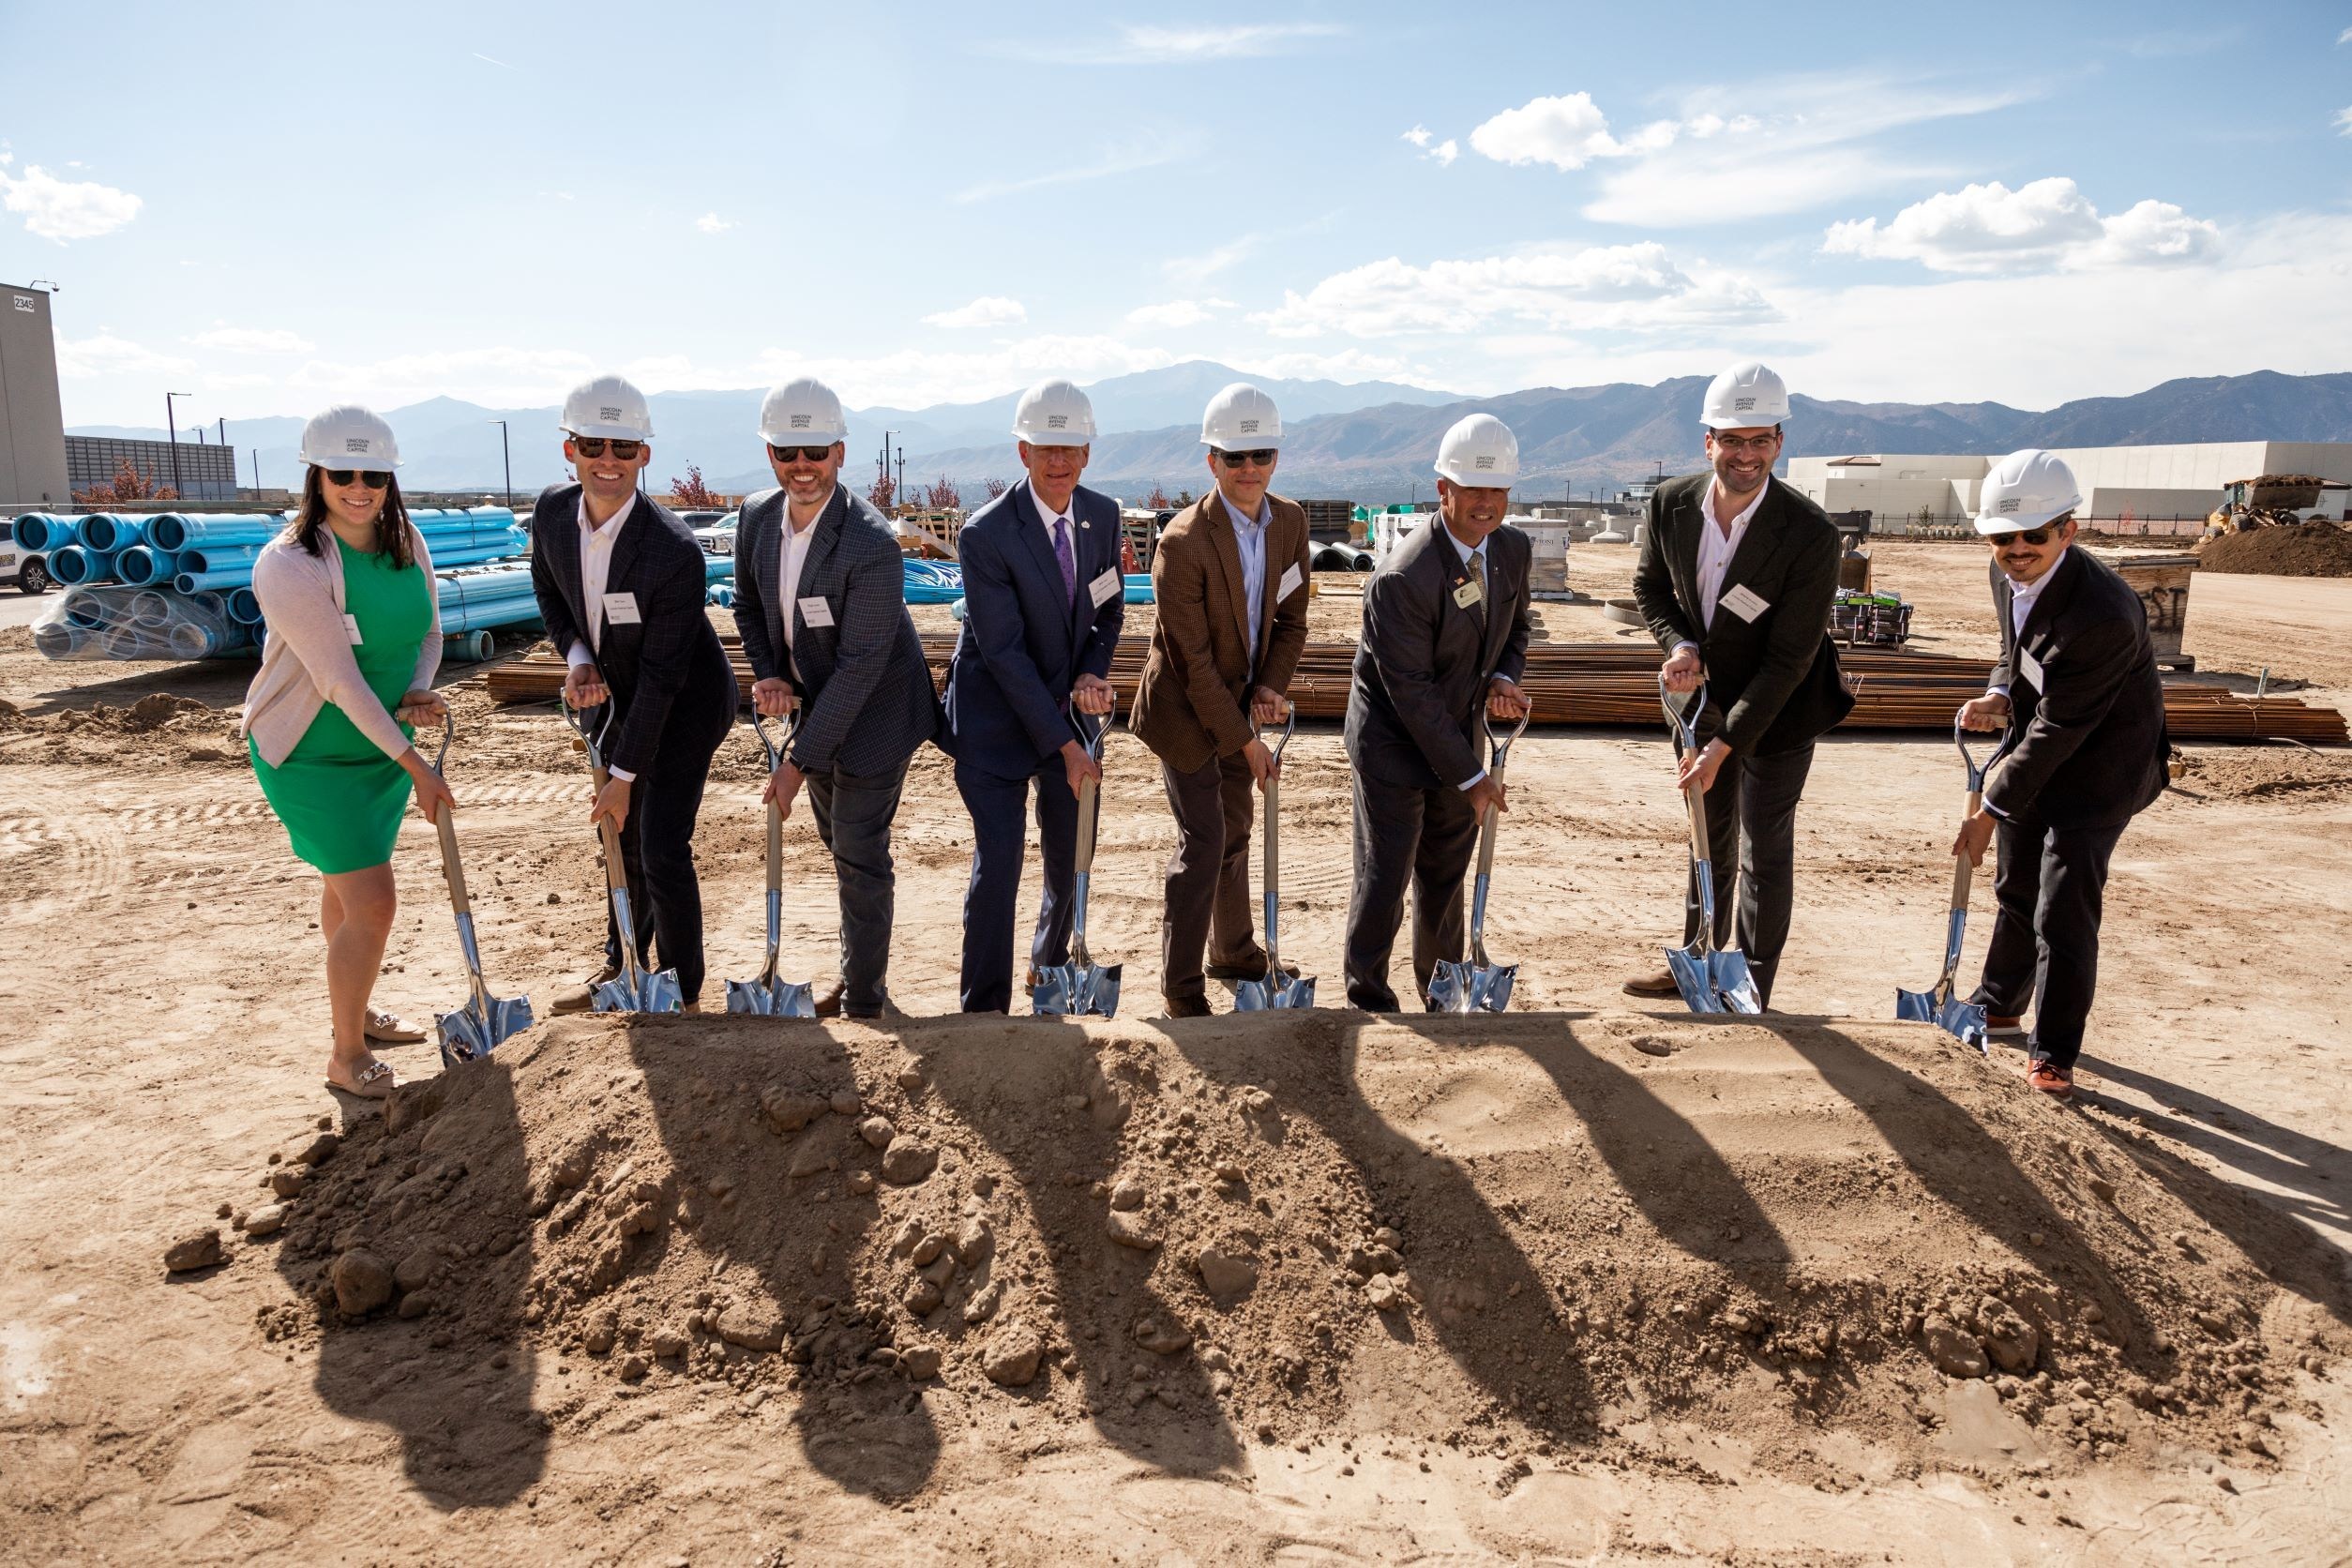 Lincoln Avenue Capital Breaks Ground on 240-Unit InterQuest Ridge Affordable Housing Development in Colorado Springs Market